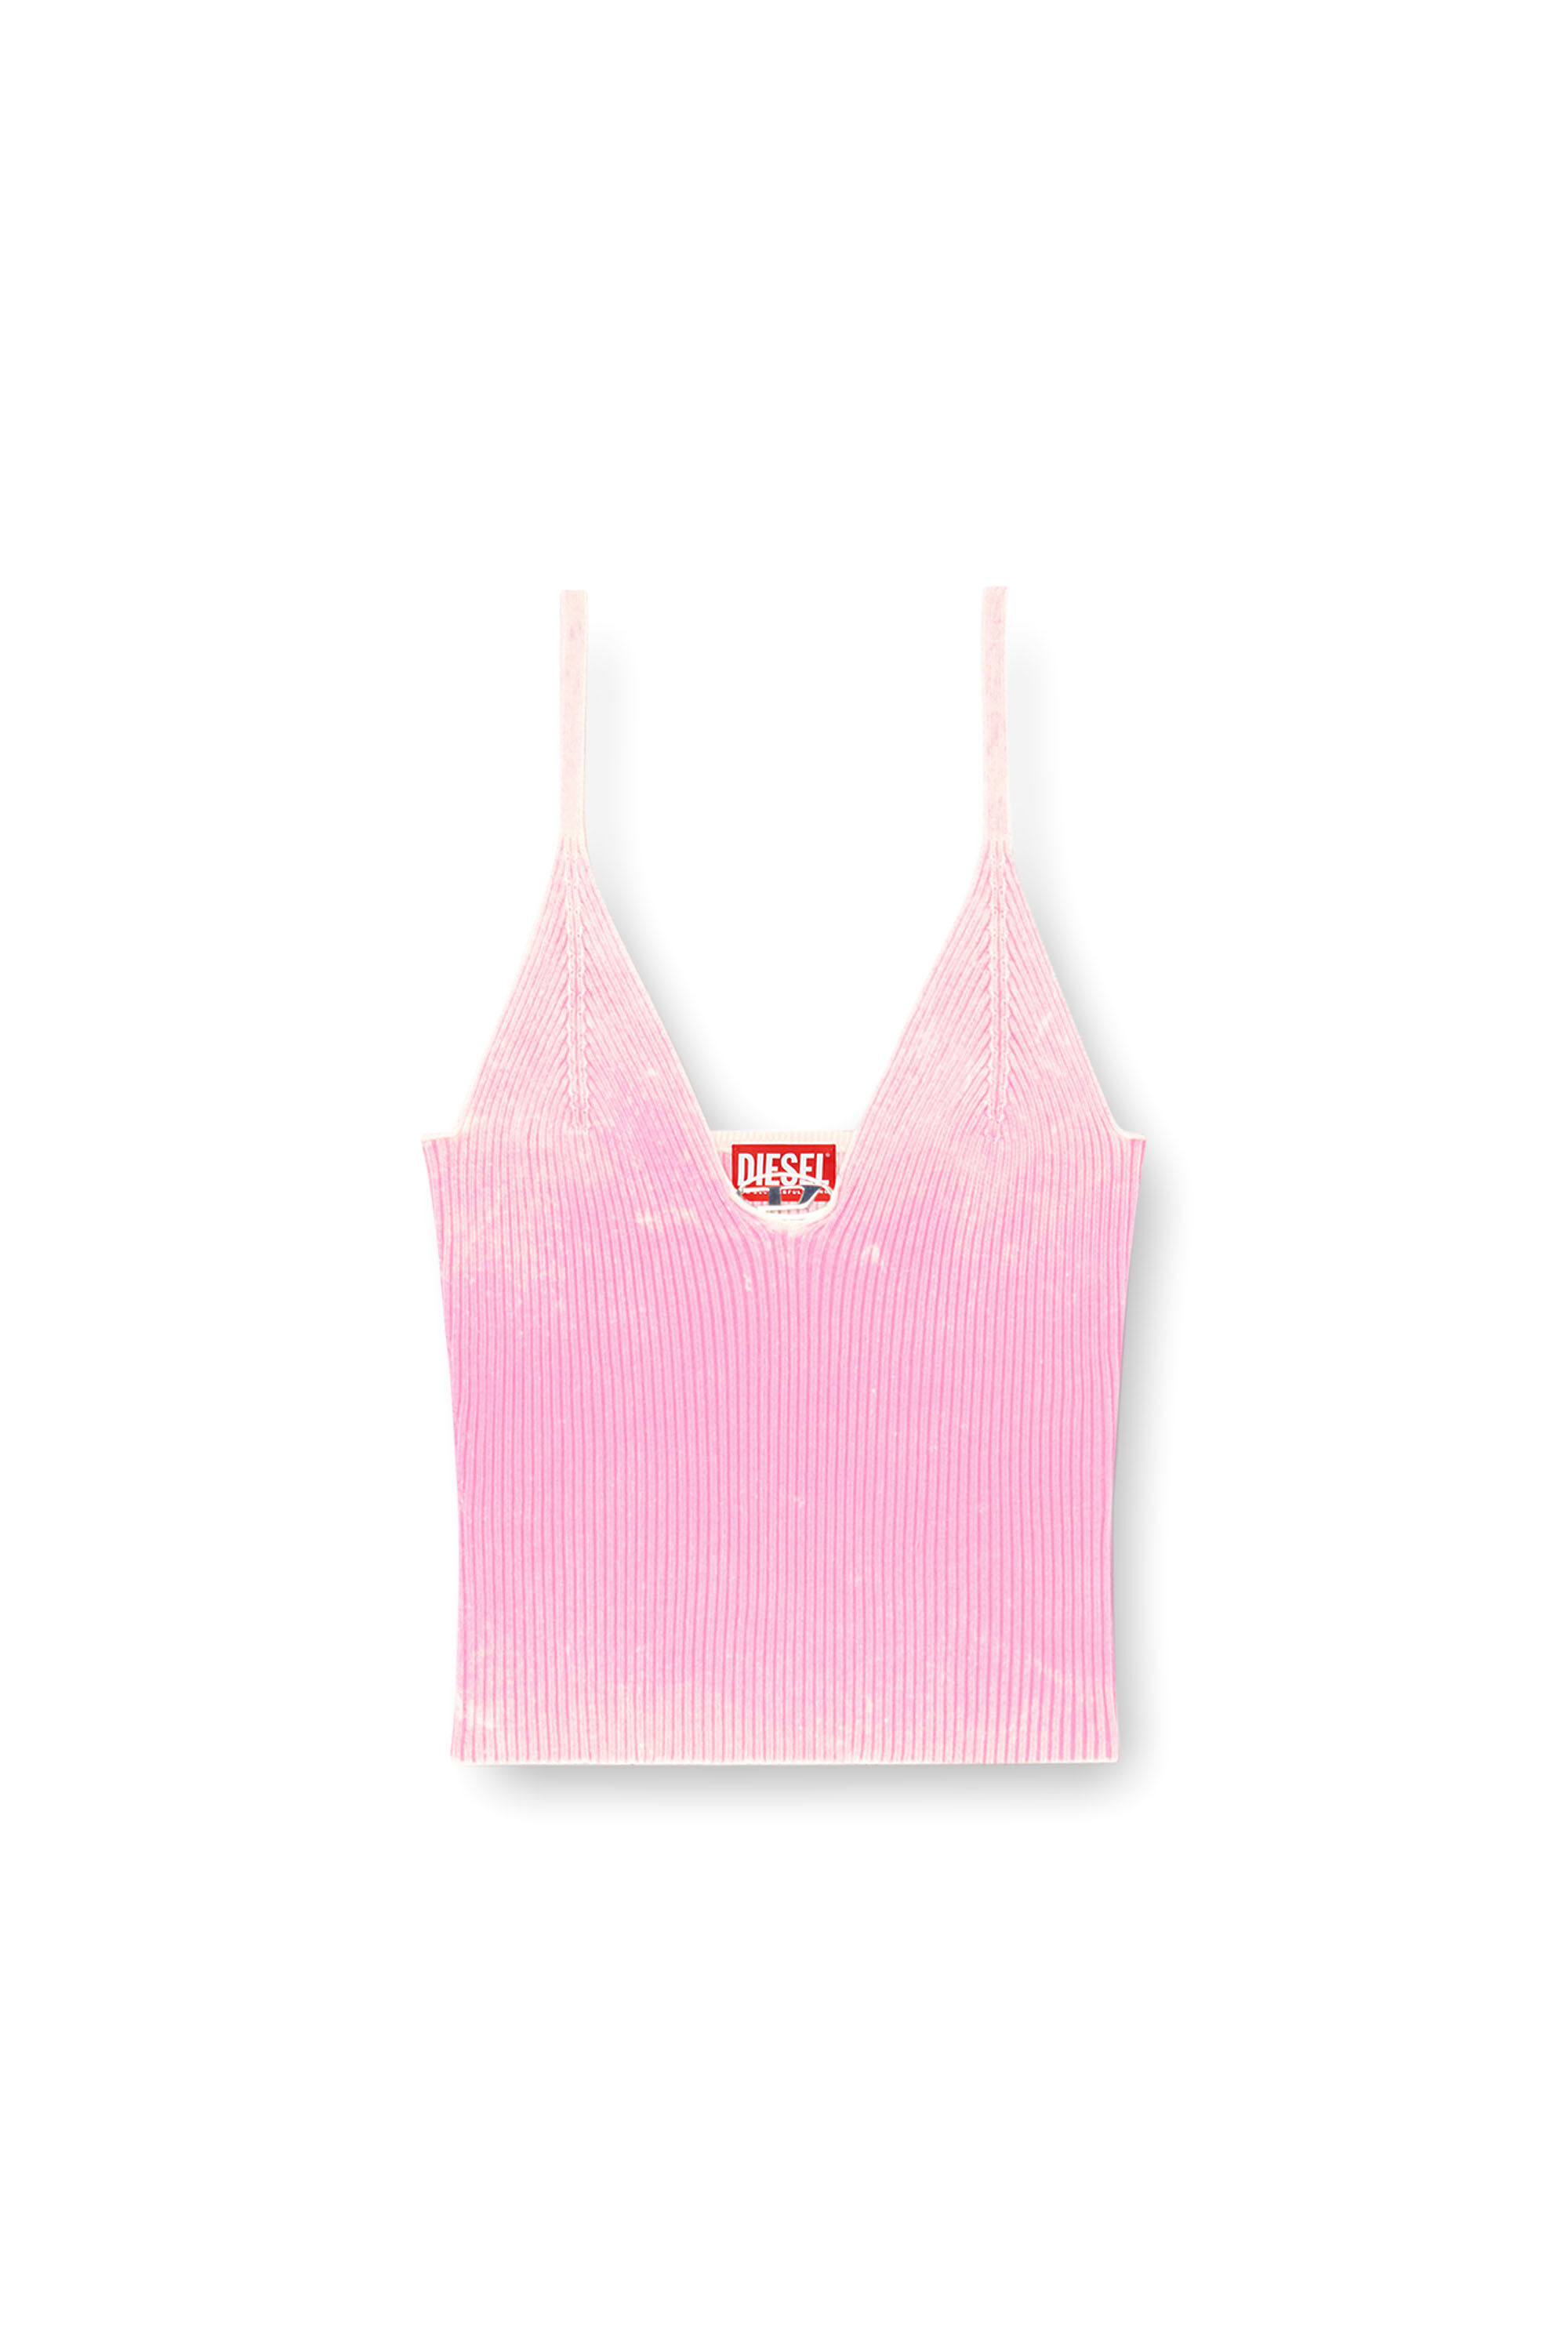 Diesel - M-LAILA, Female Camisole in faded ribbed knit in ピンク - Image 2